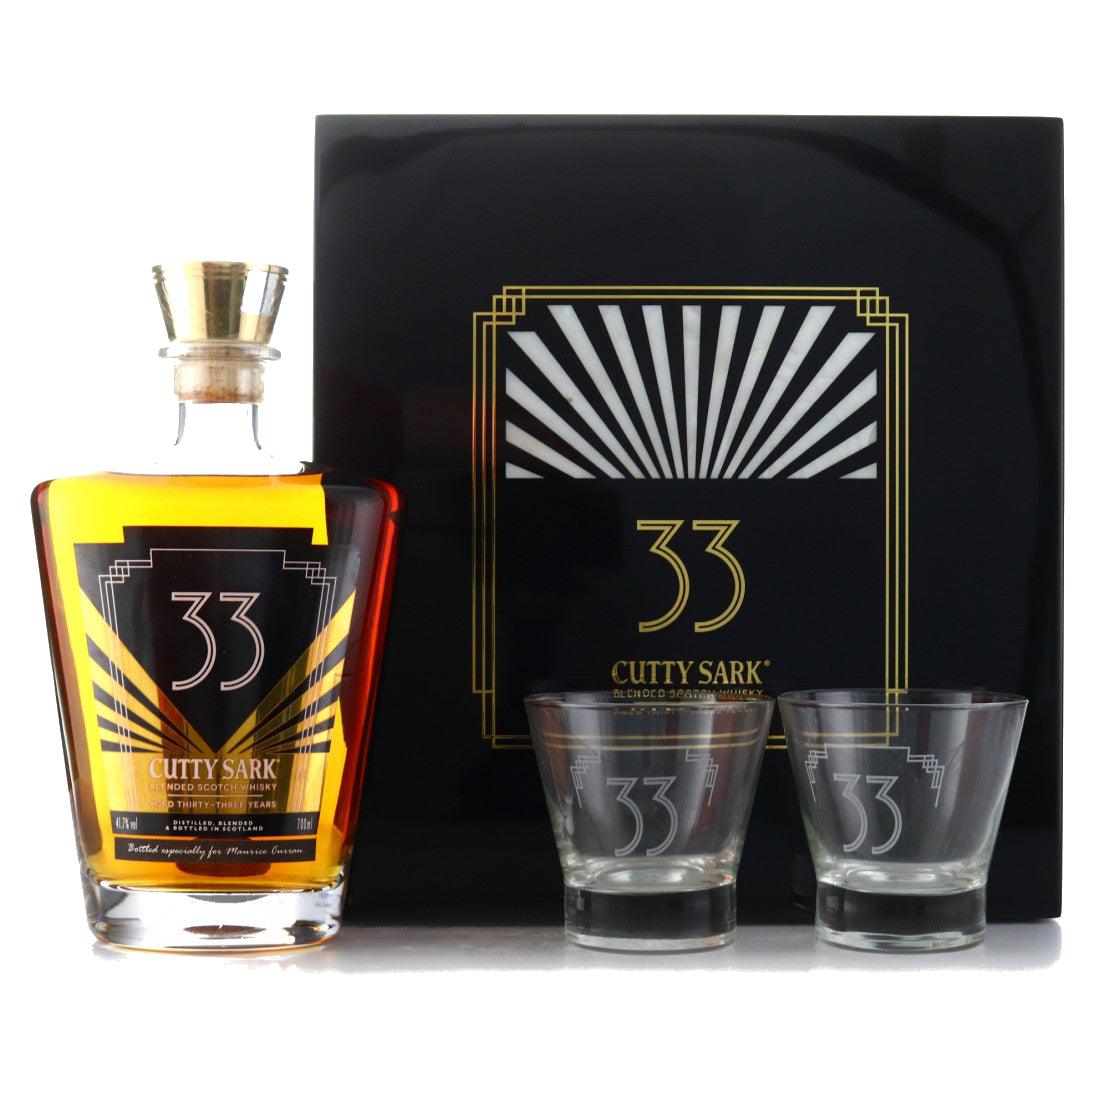 Cutty Sark 33 Years Old Blended Scotch Whisky